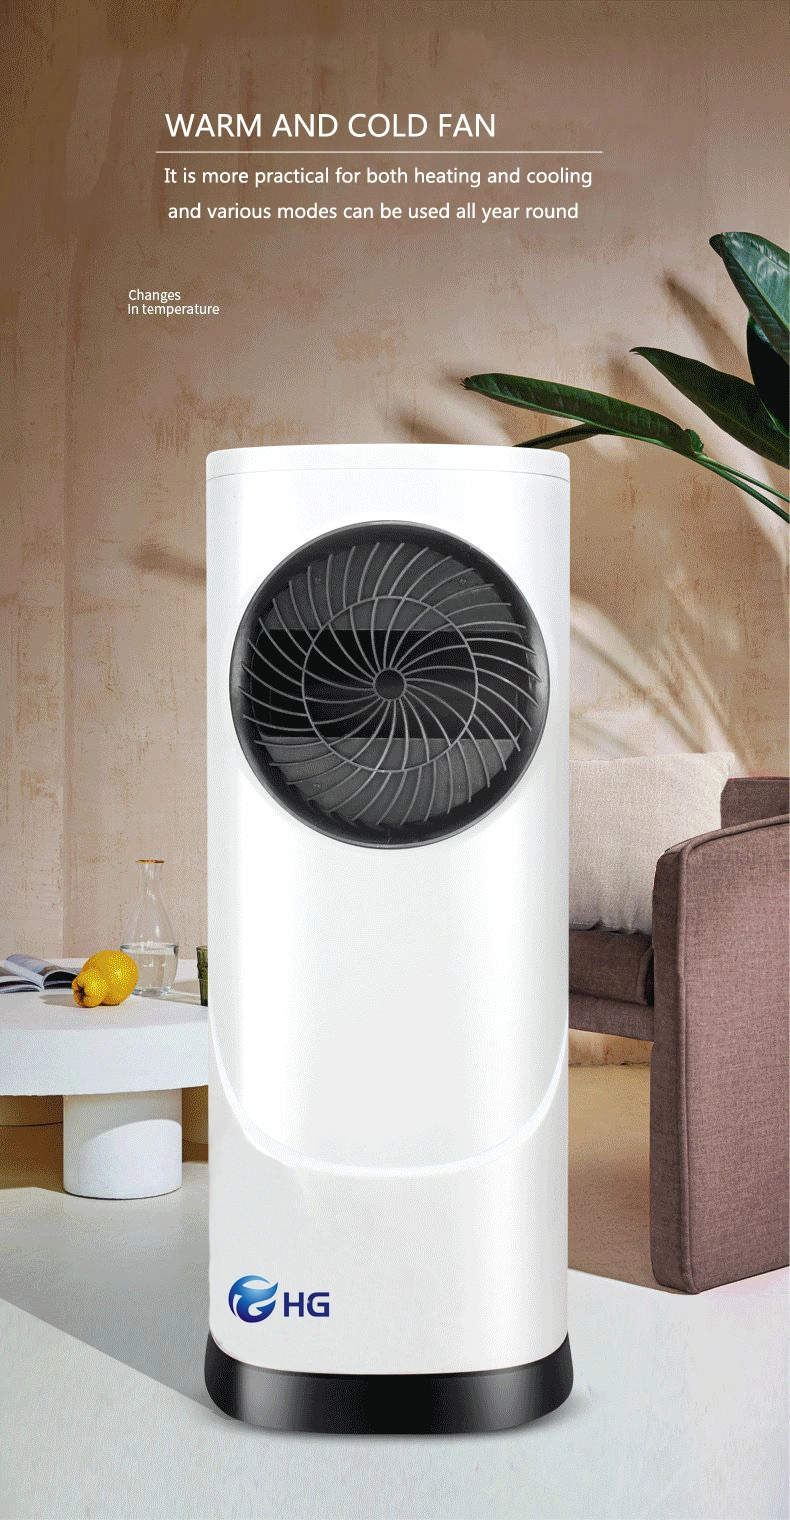 New Arrival Modern 4 in 1 Cooling and Heating Fan HEPA Filter Purifier Plasma Air Purifier Cleaner Cooling Bladeless Tower Fan